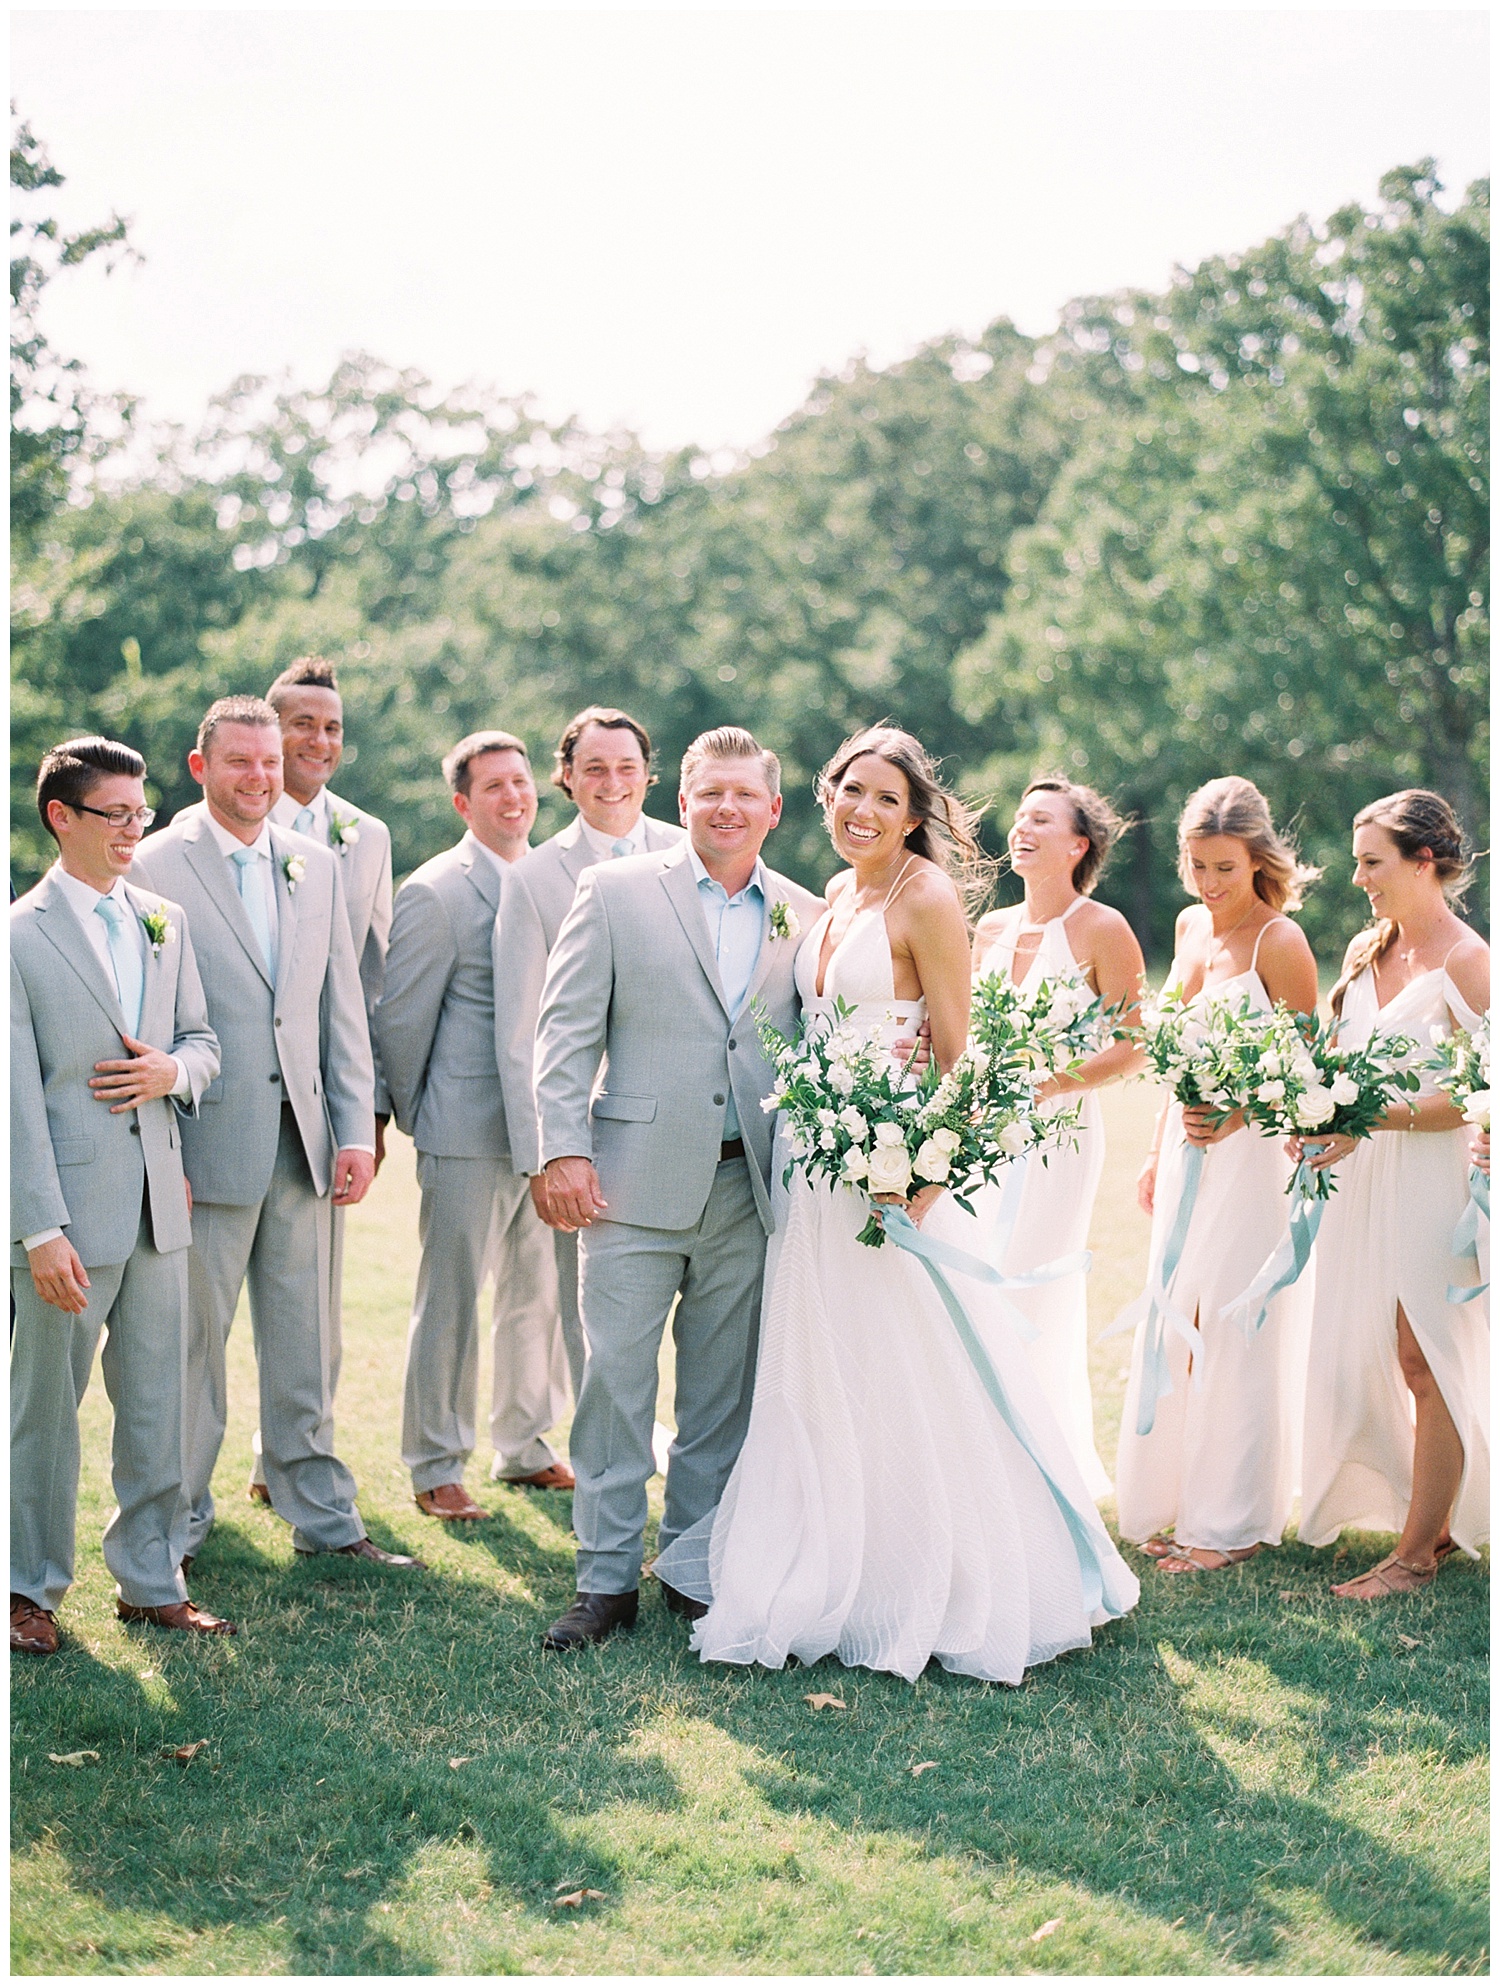 Popular Texas Venue - Questions Bridal Party Members Want to Ask